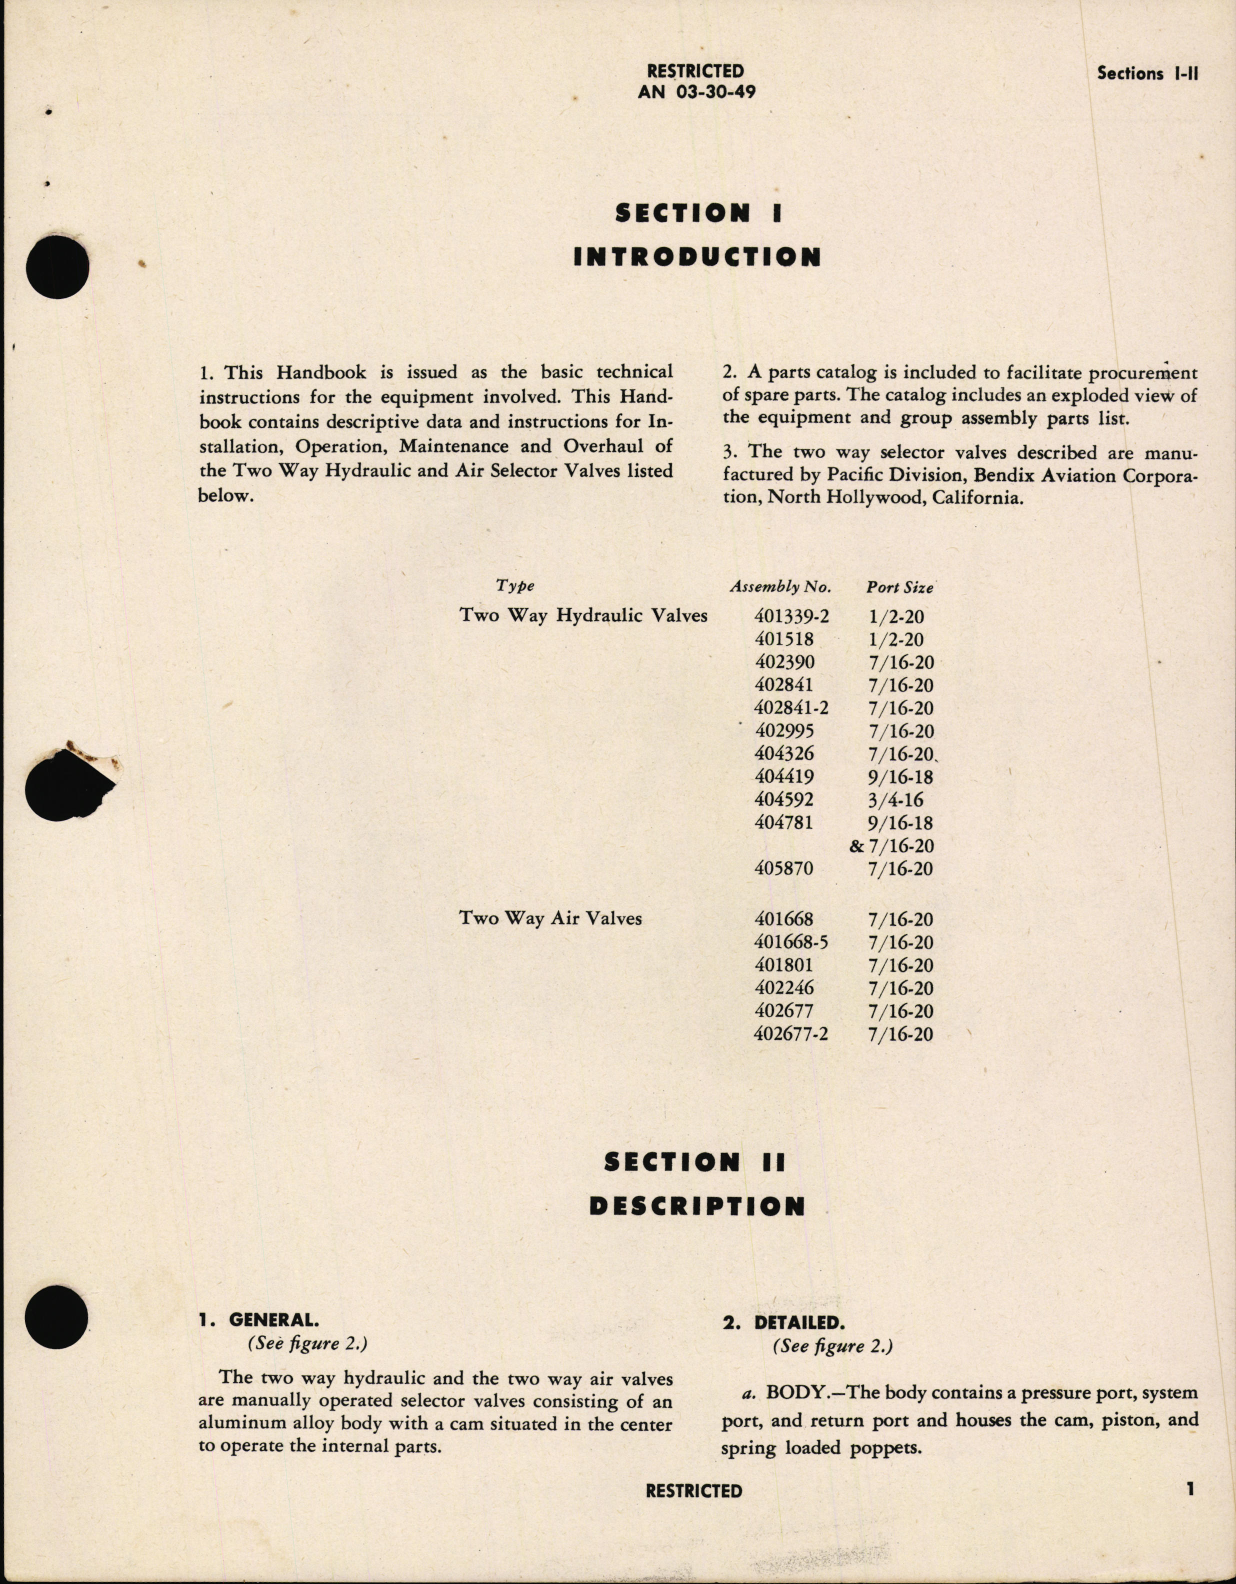 Sample page 5 from AirCorps Library document: Operation, Service and Overhaul Instructions with Parts Catalog for Two-Way Hydraulic and Air Valves